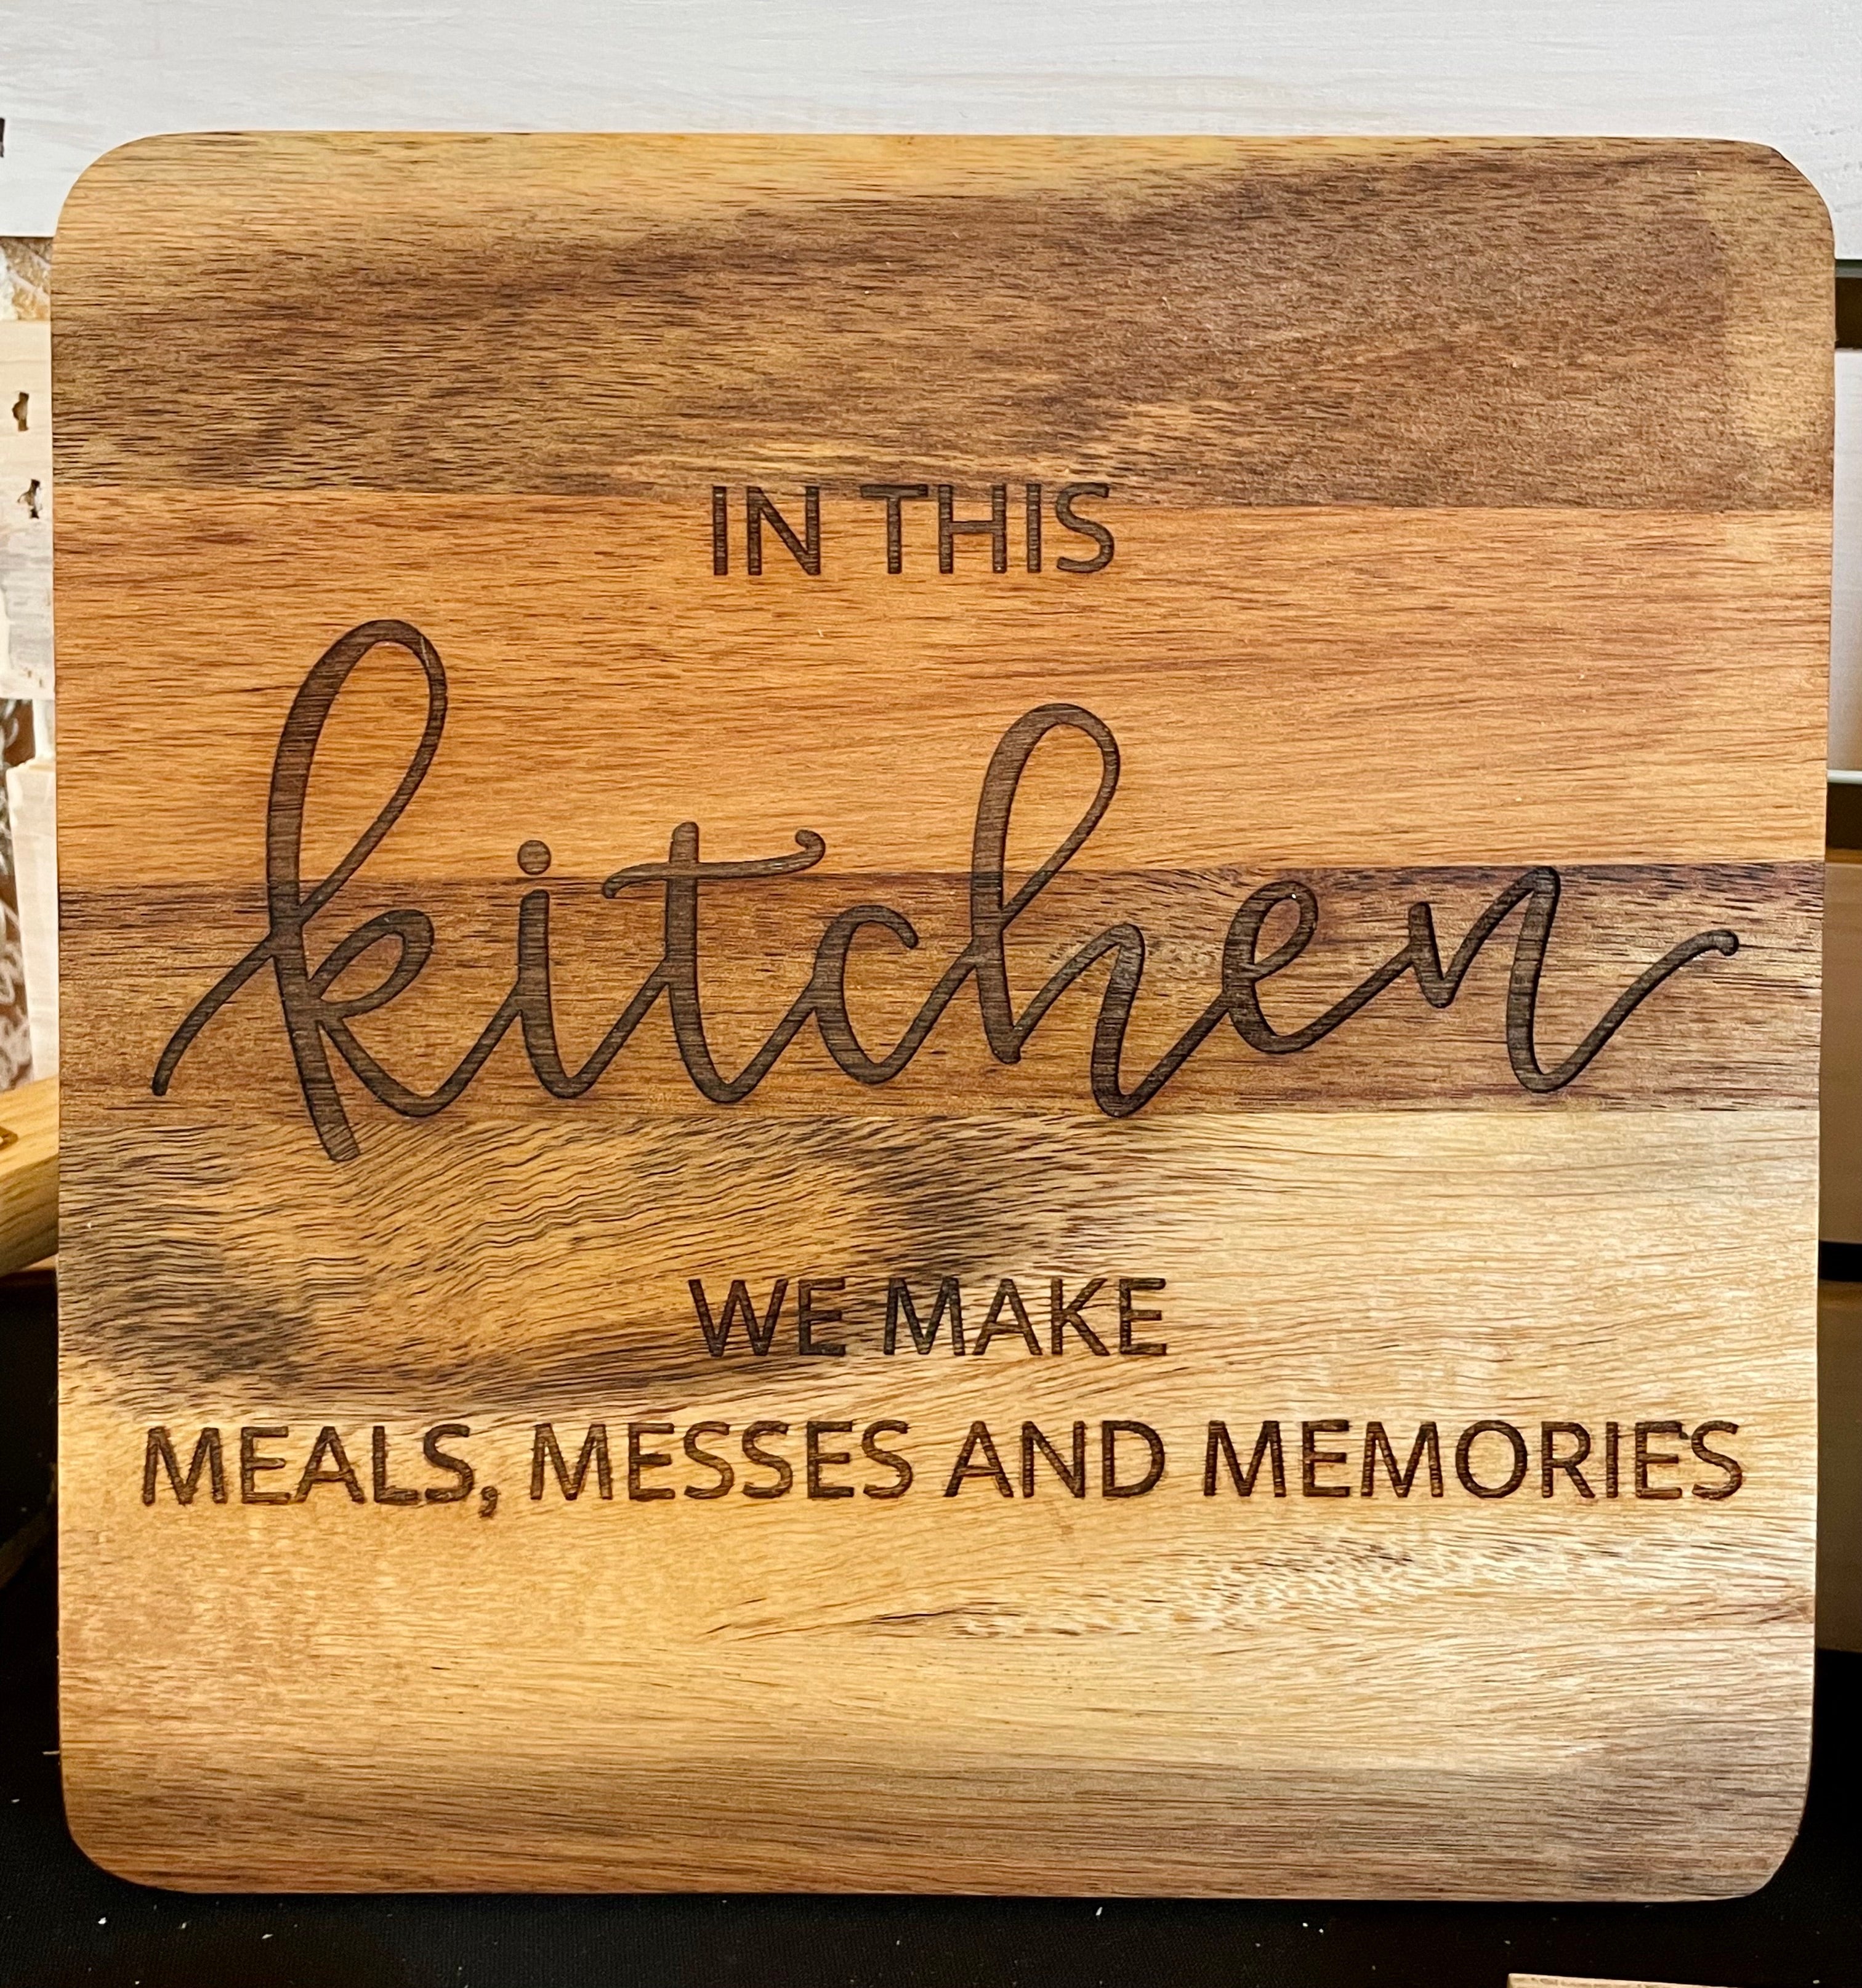 Meals, Messes and Memories Cutting Board